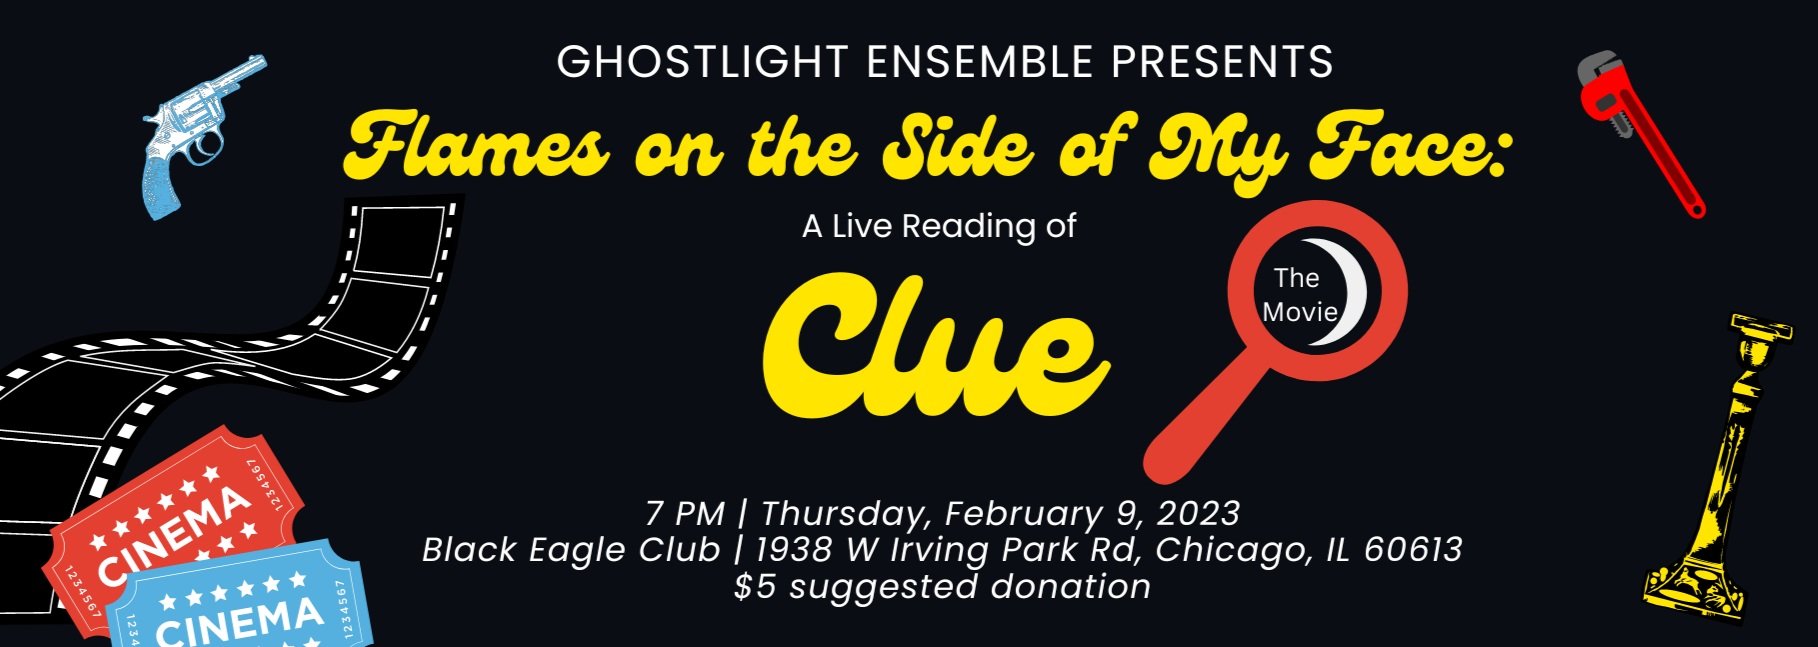 Flames on the Side of My Face: A Live Reading of Clue